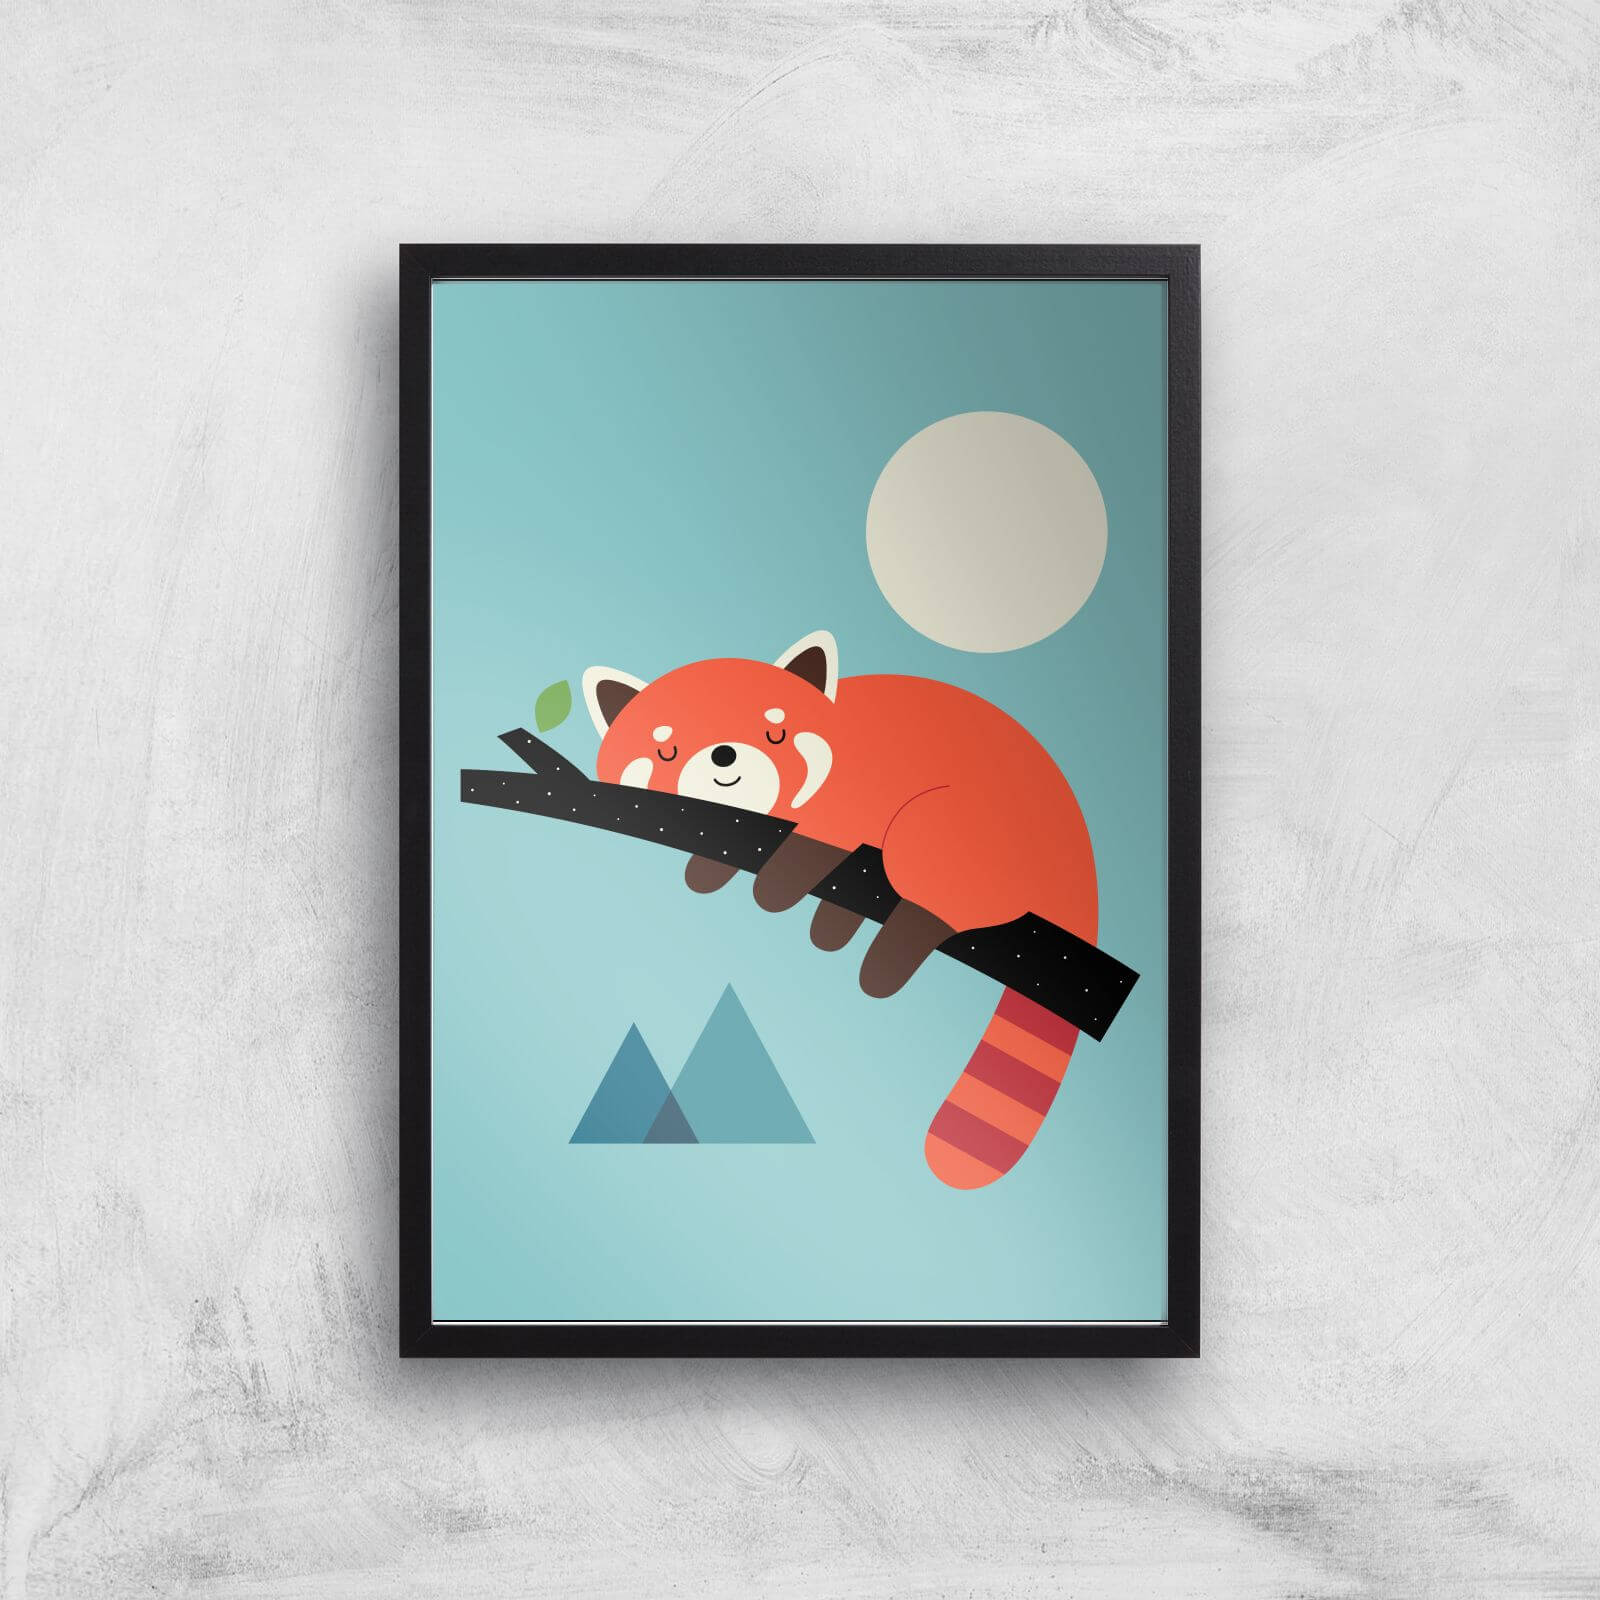 Andy Westface Nap Time Giclee Art Print - A2 - Black Frame